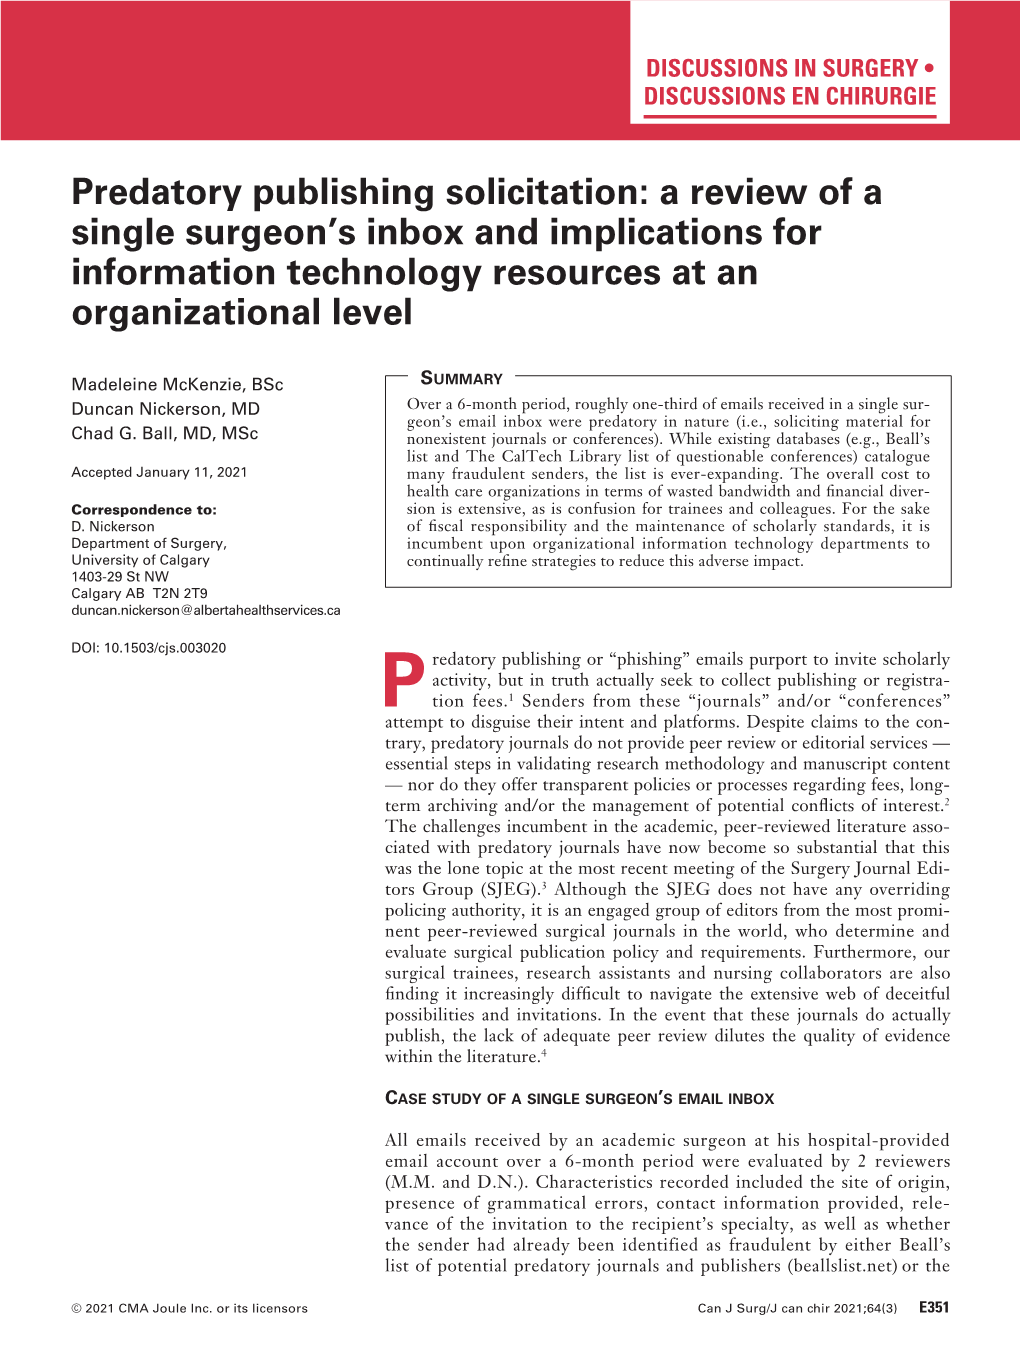 Predatory Publishing Solicitation: a Review of a Single Surgeon’S Inbox and Implications for Information Technology Resources at an Organizational Level